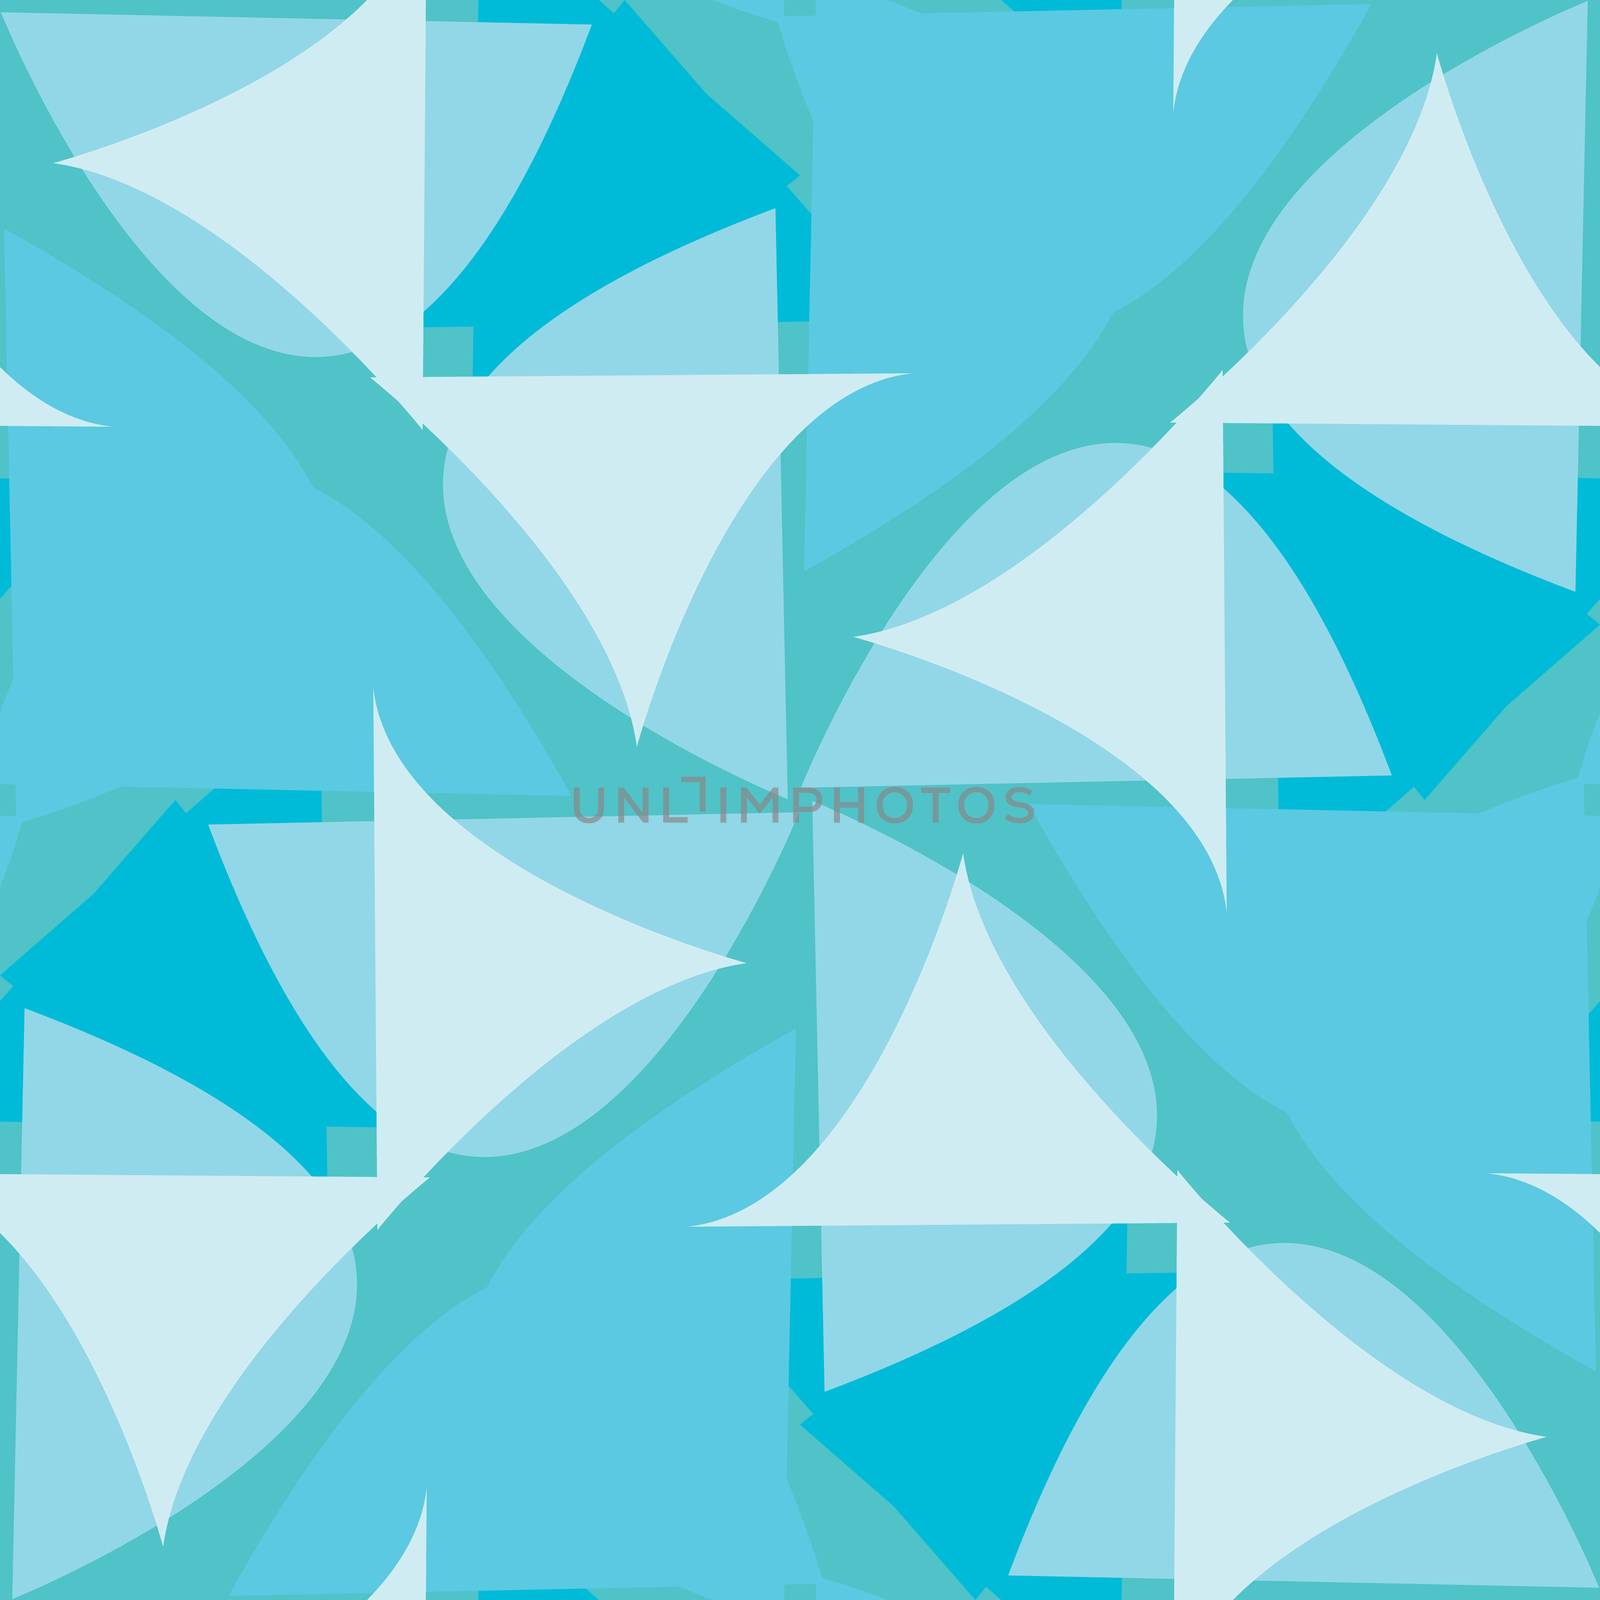 Abstract seamless background pattern of blue triangular shapes